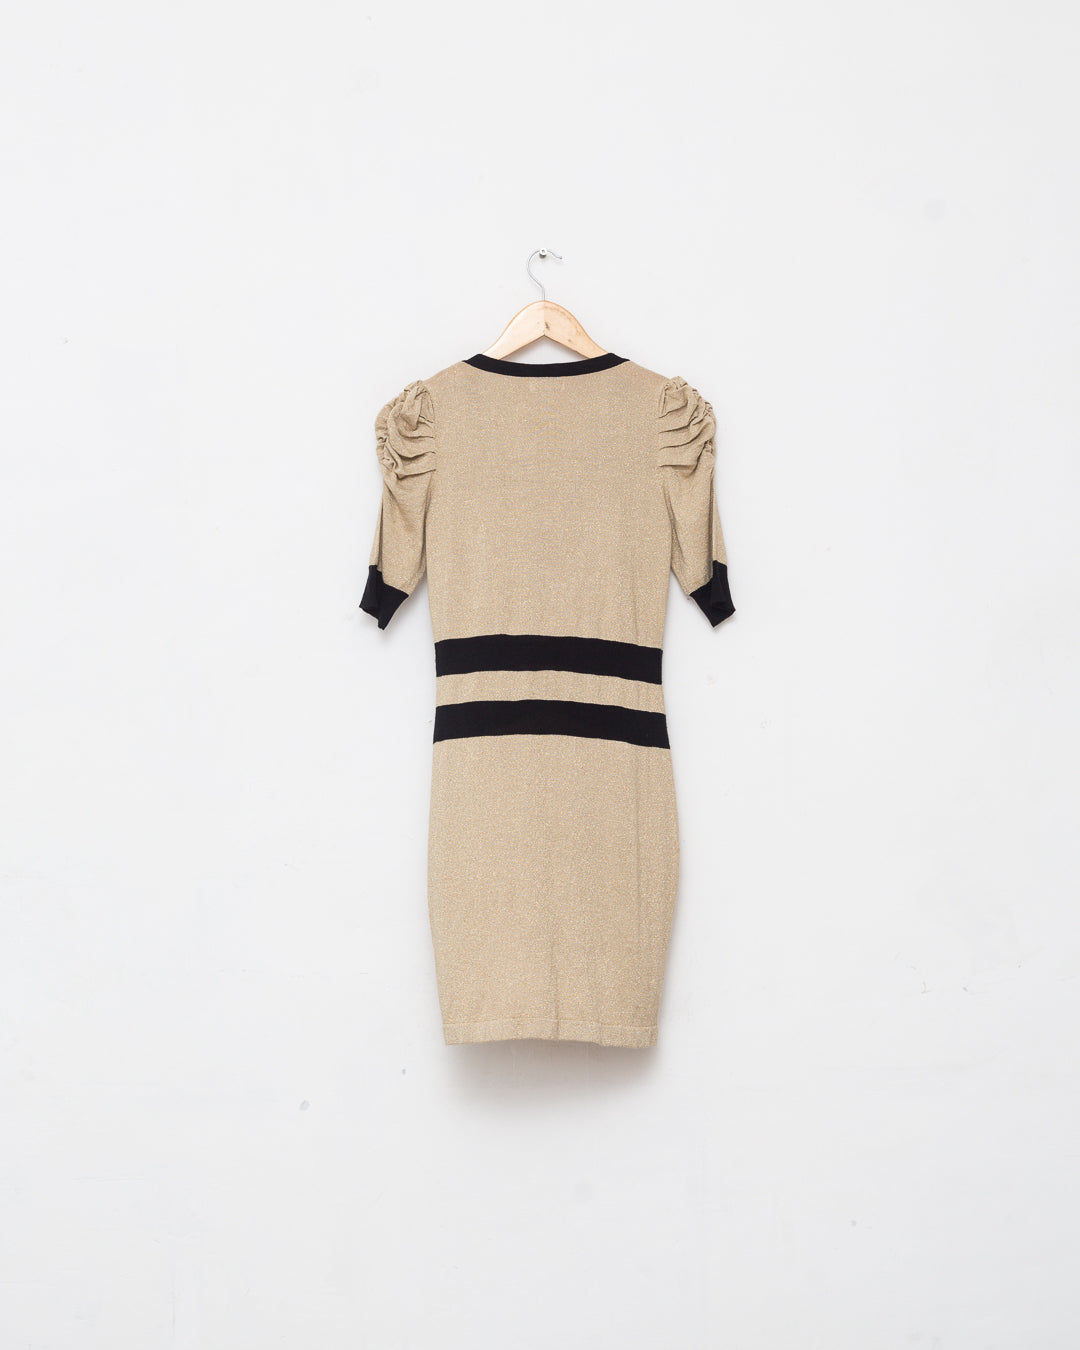 ‘THIS’ Chanel Knit Contrasting Panels Dress